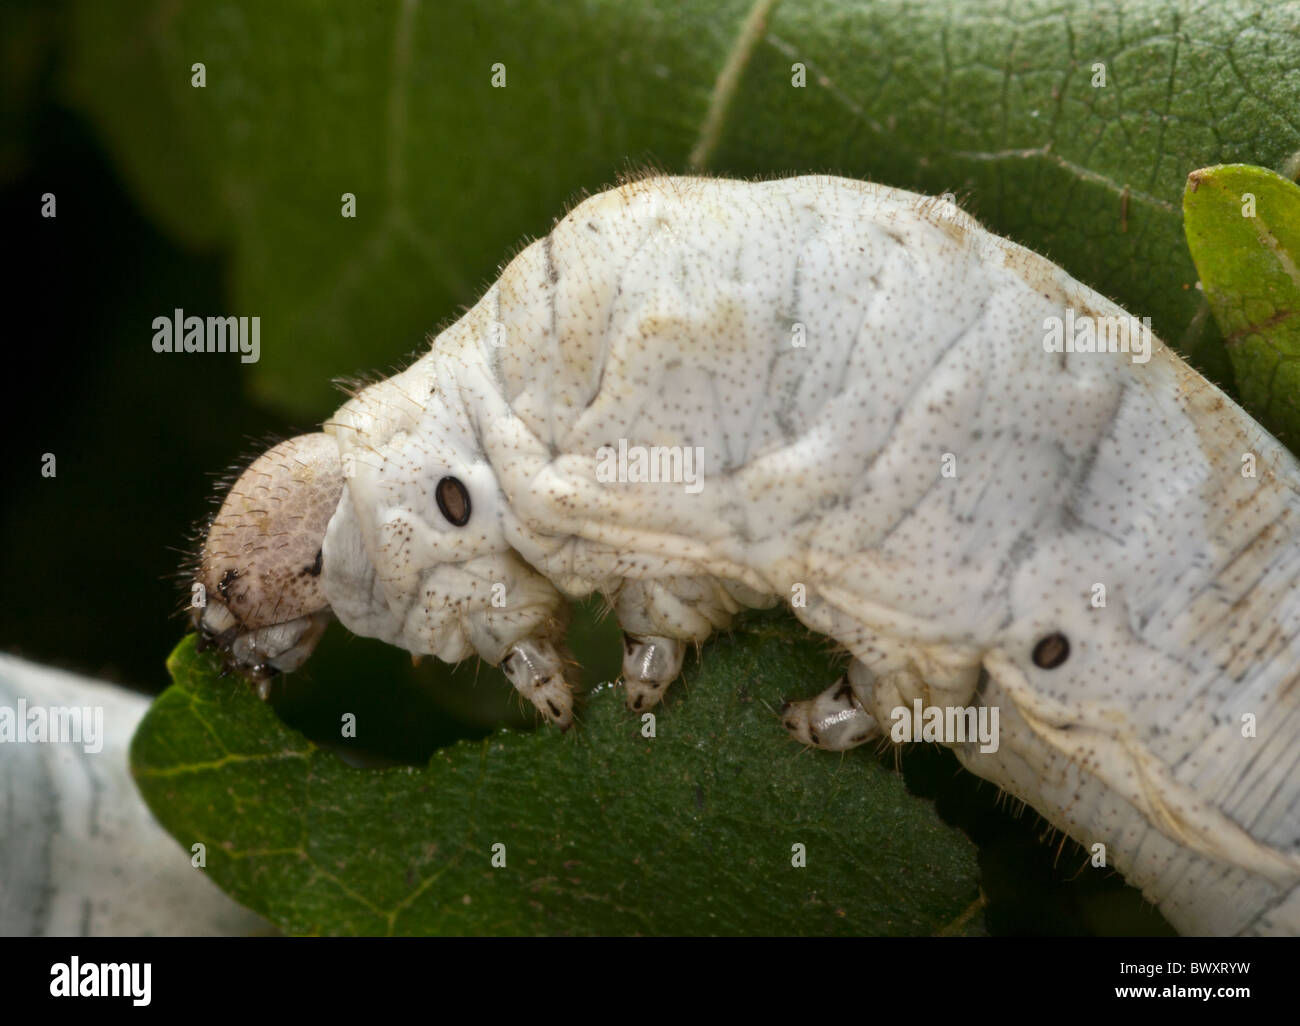 Detail of a silk worm caterpillar (Bombyx mori) on mulberry leaves Stock Photo